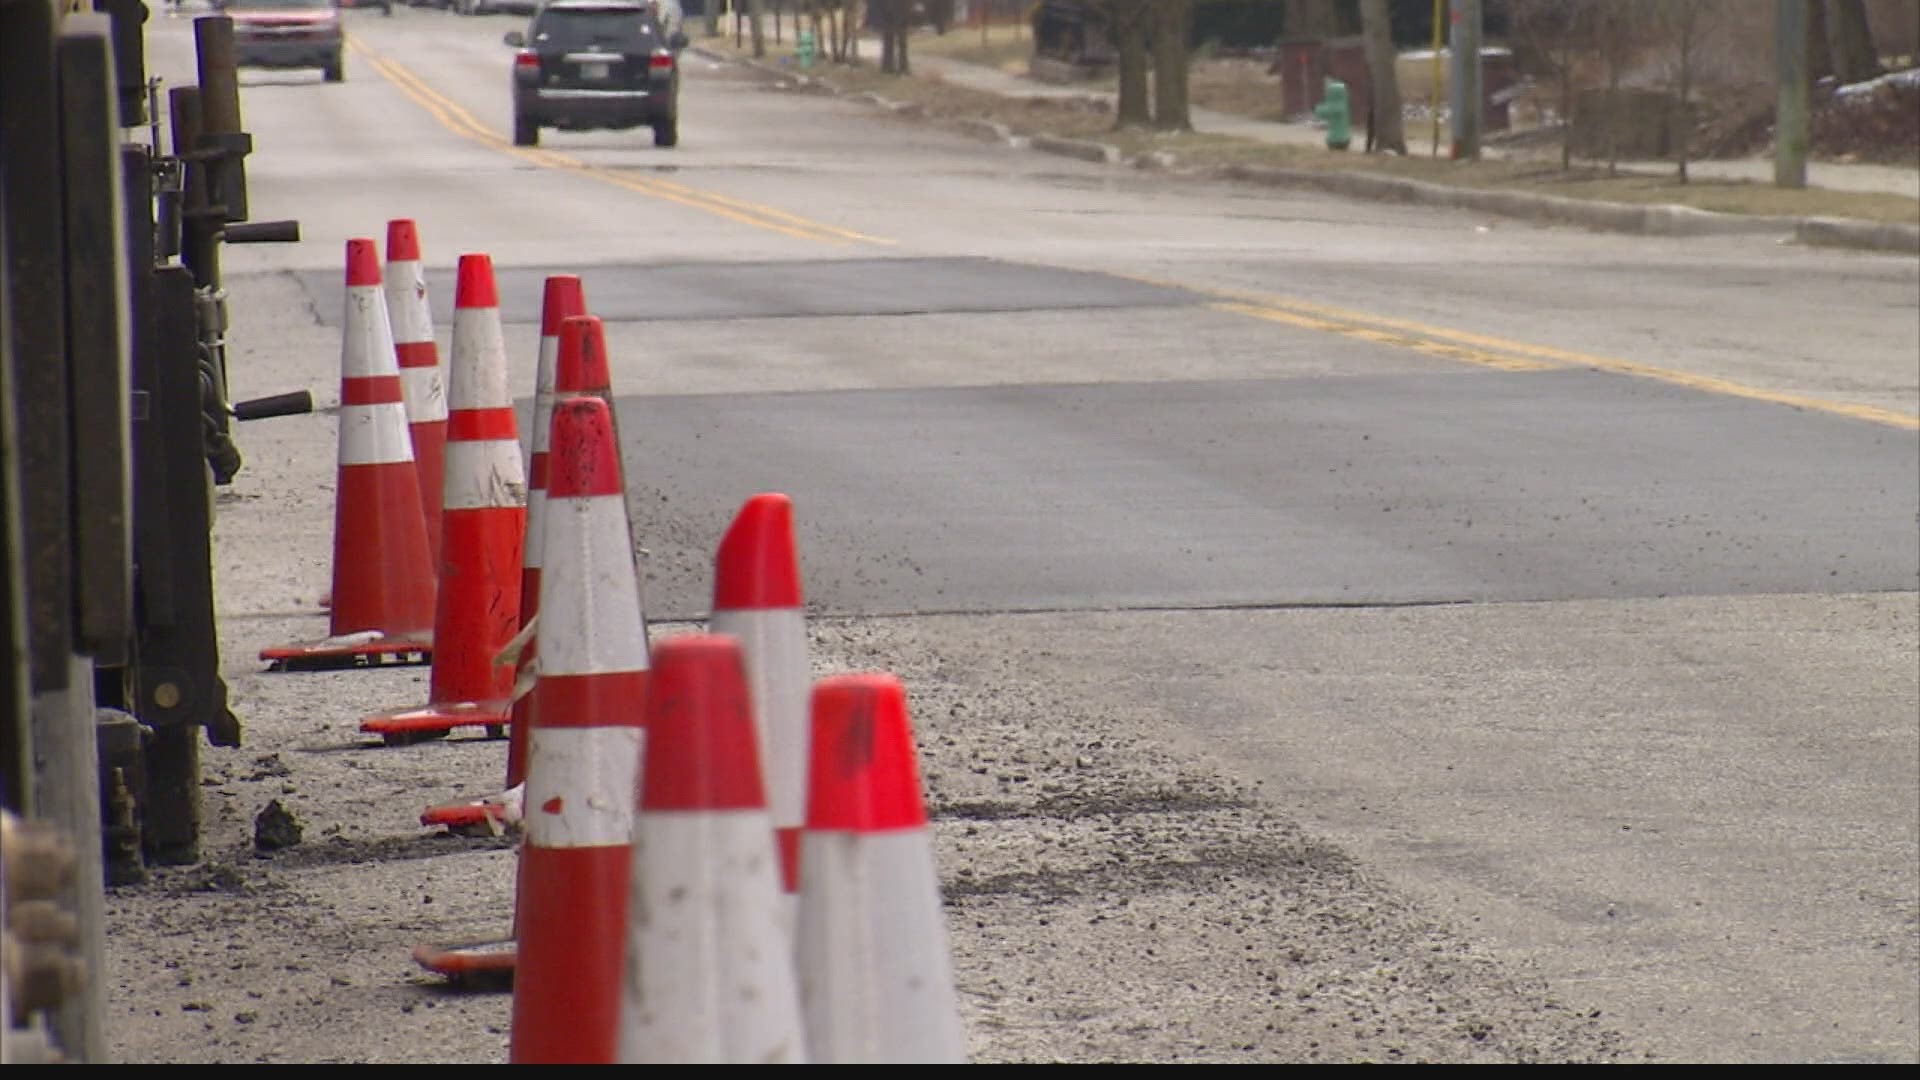 The city of Indianapolis announced its big summer road projects. The "to do list" include street, sidewalk and sewer improvements, costing $167 million.